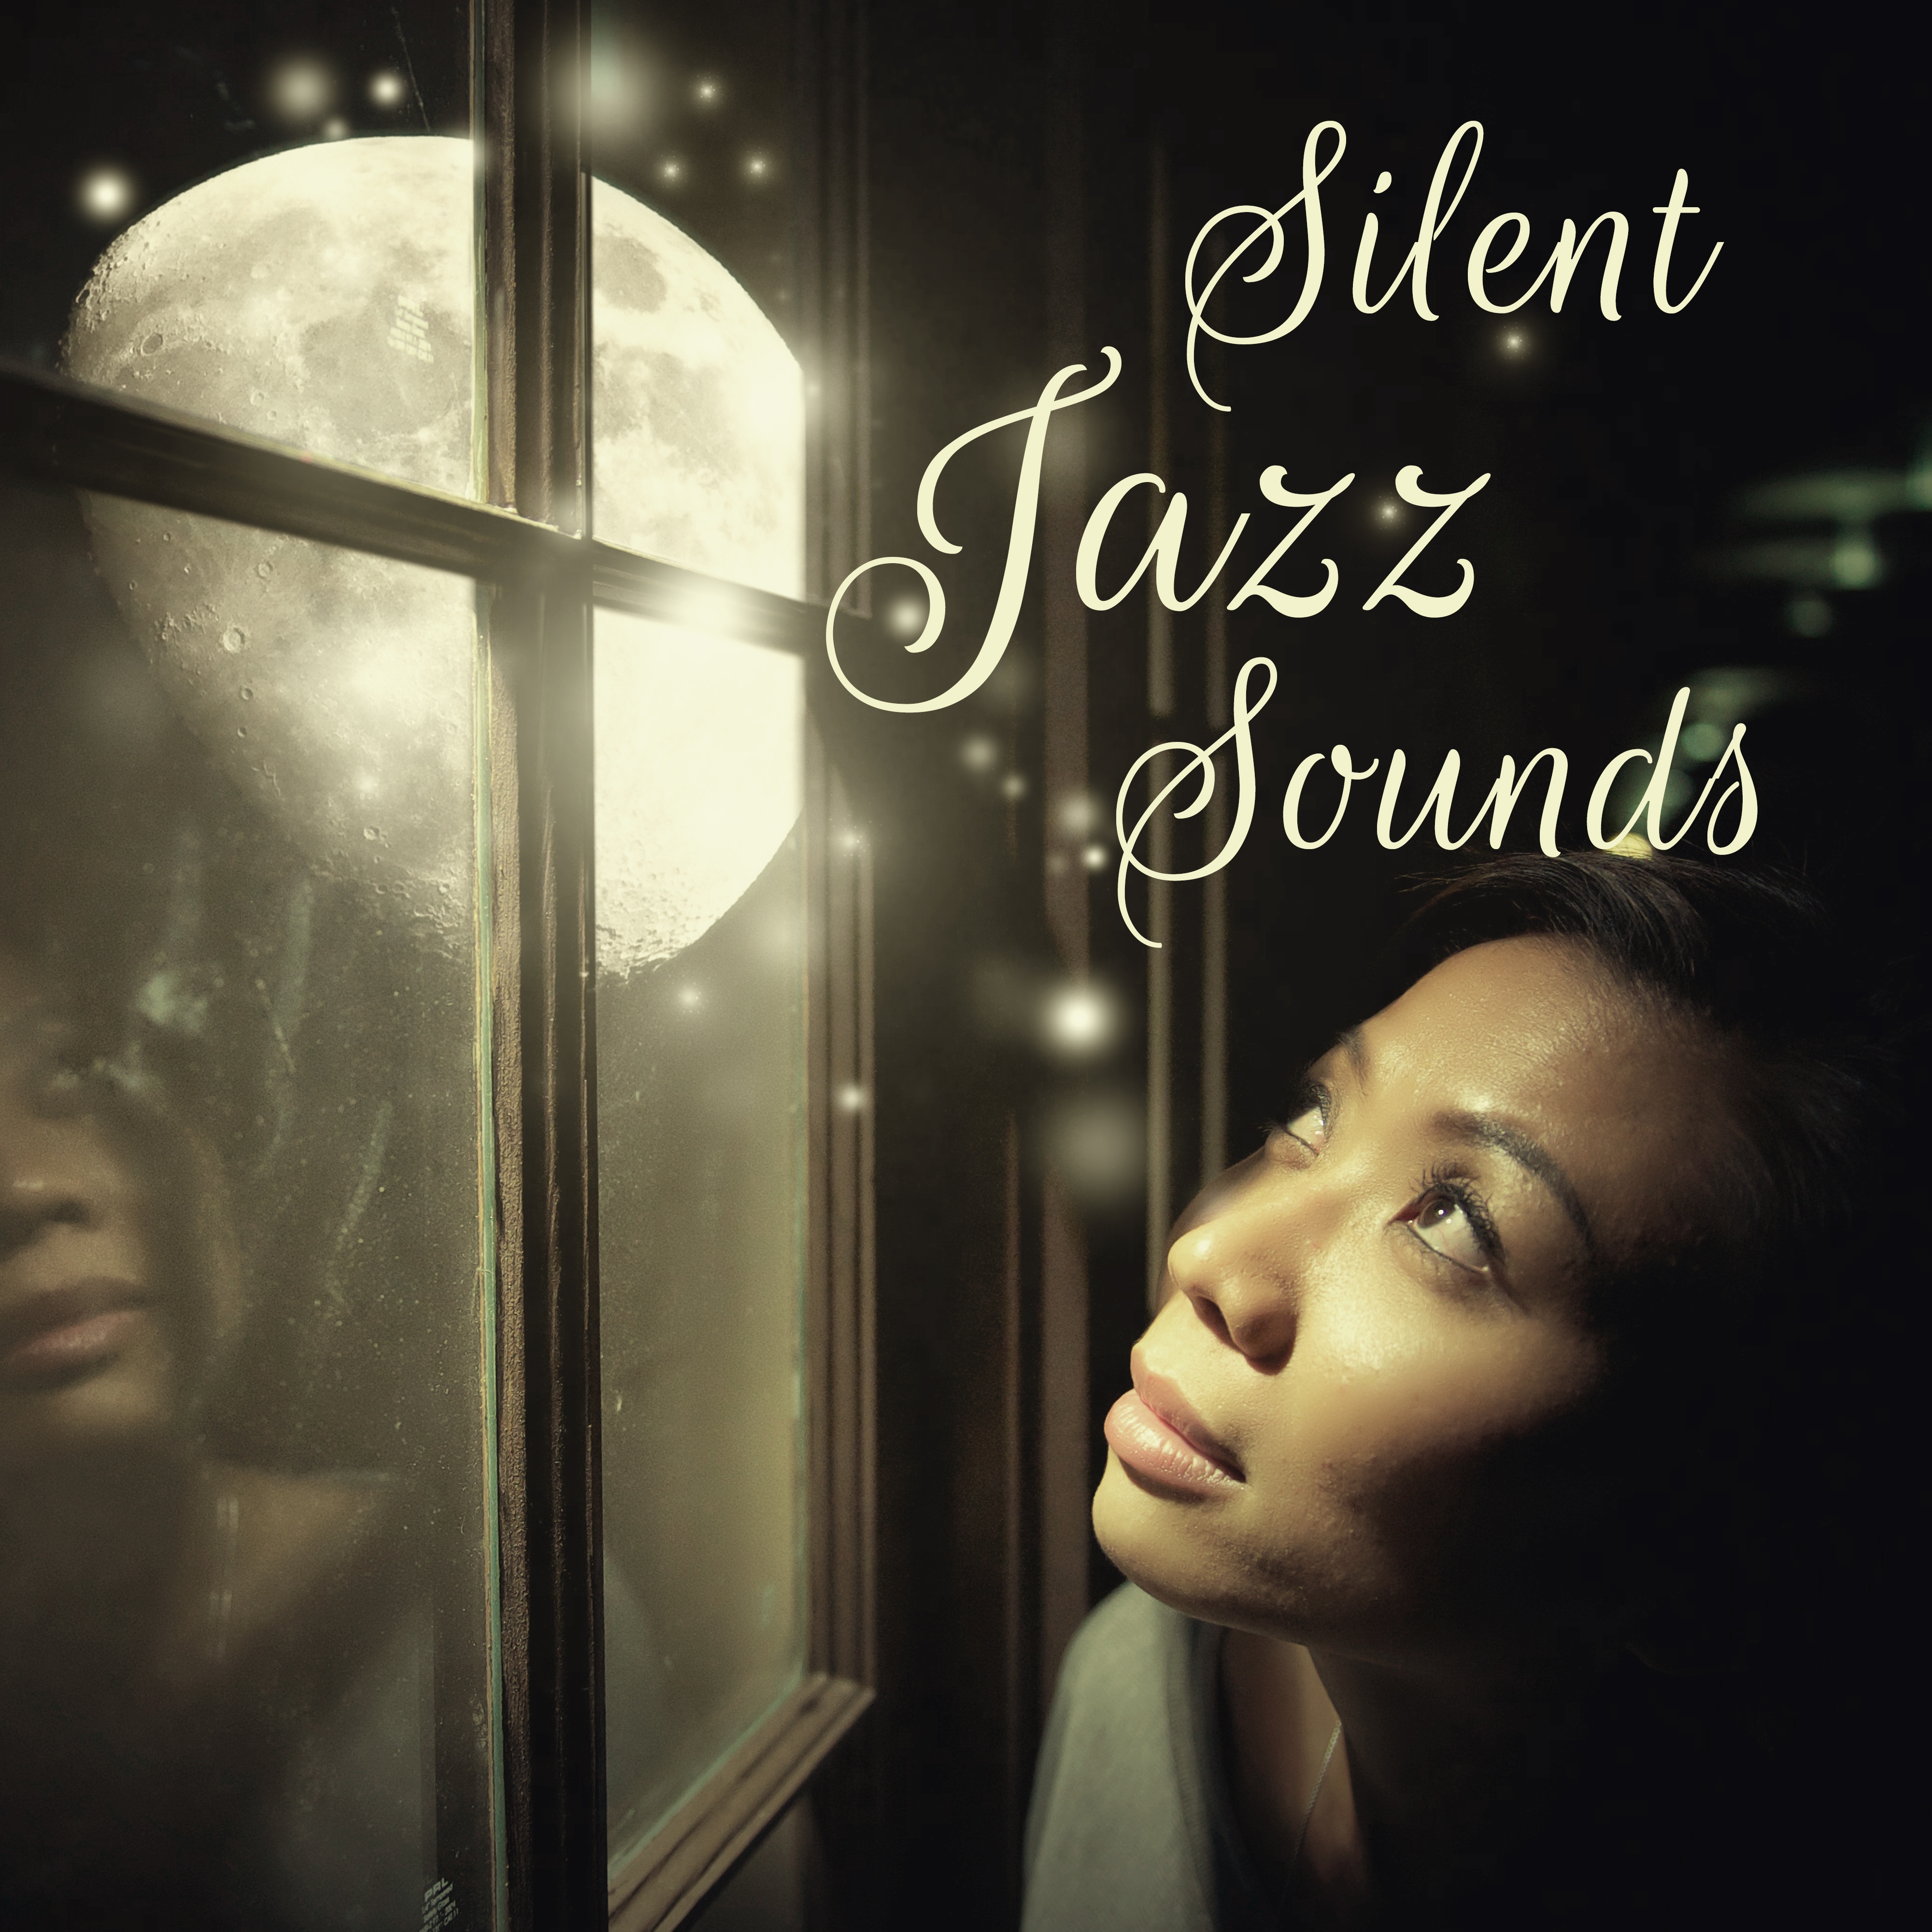 Silent Jazz Sounds  Mellow Piano Bar, Soothing Sounds, Instrumental Piano Jazz, Piano Lounge, Relaxing Night